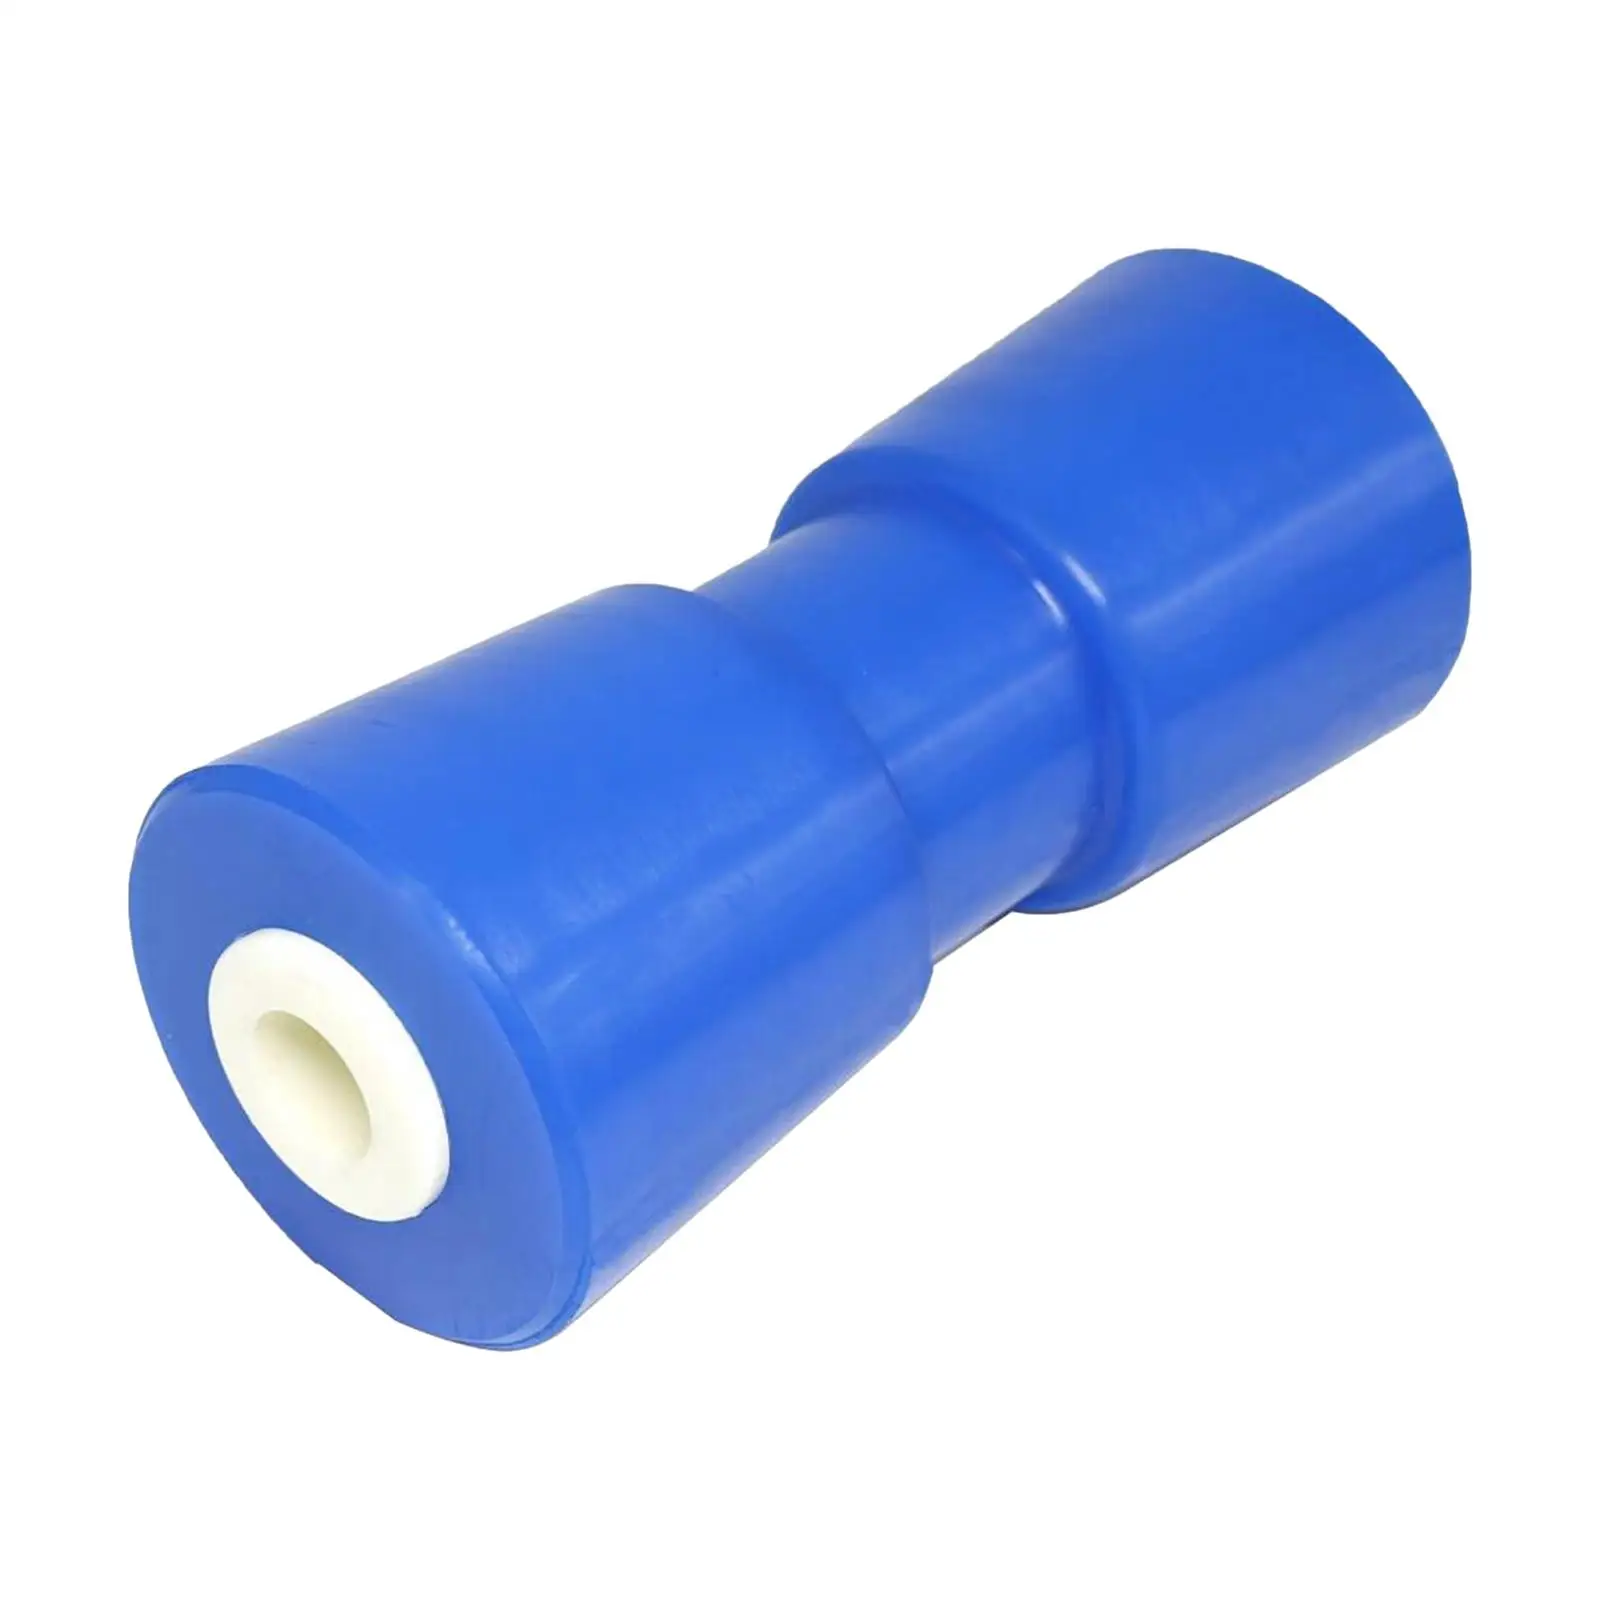 Boat Trailer Bow Roller Roll Smoothly Blue Heavy Duty Rolling Tool for Ship Parts High Performance Replacement Professional